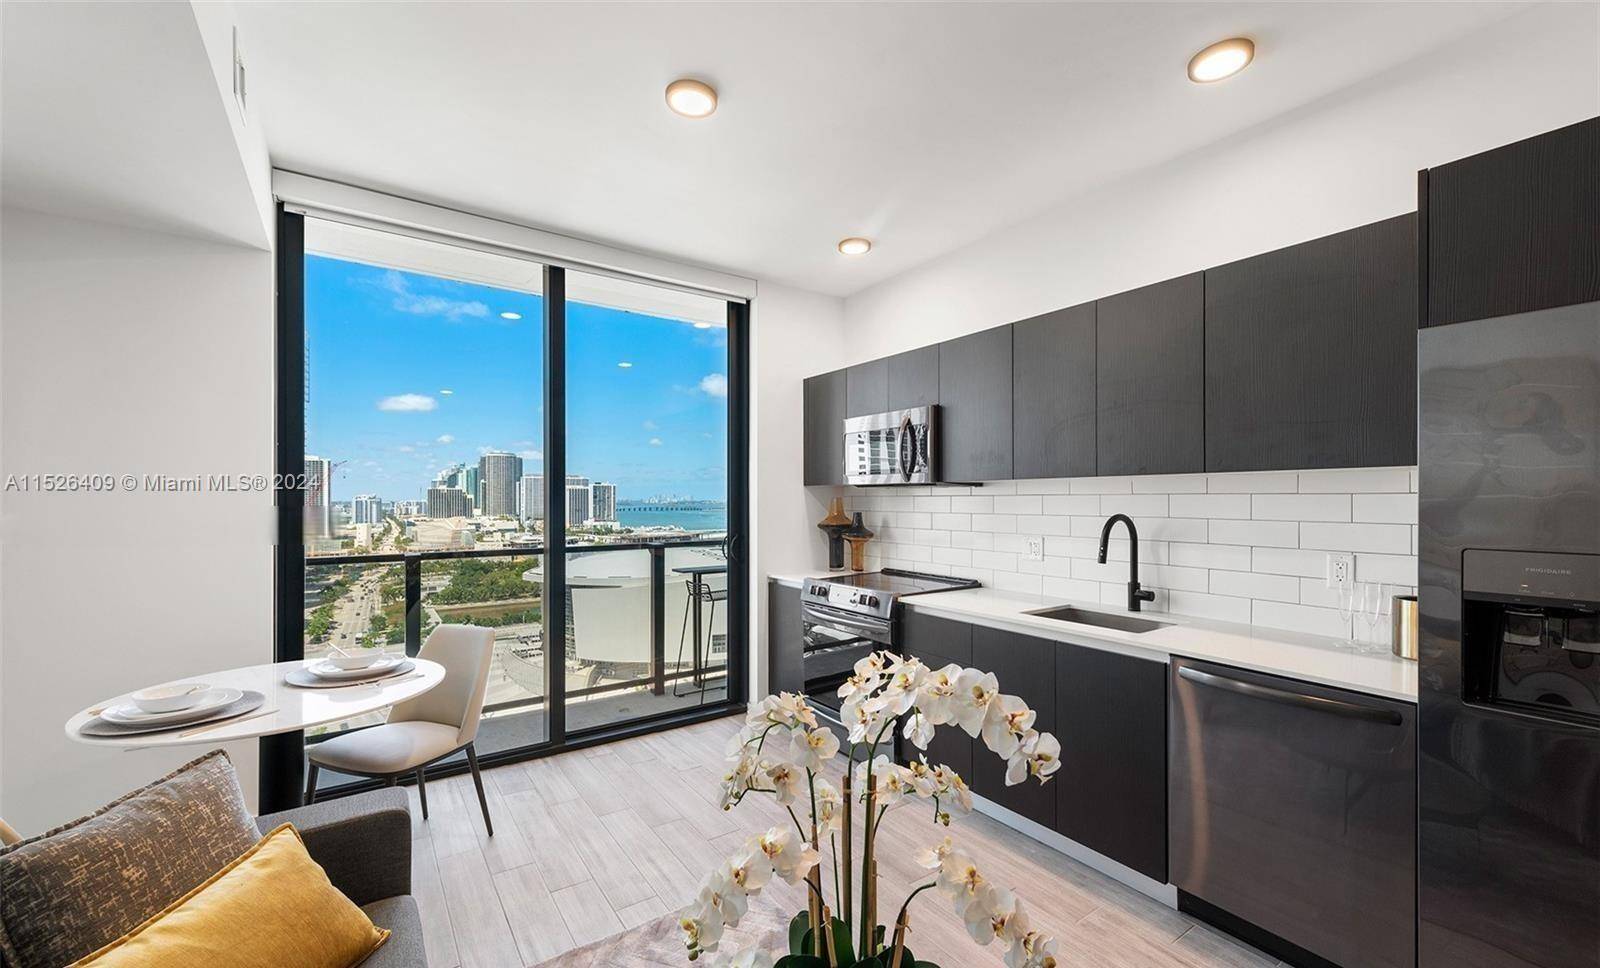 Welcome to this stunning studio hotel condo unit situated in downtown Miami's vibrant heart.